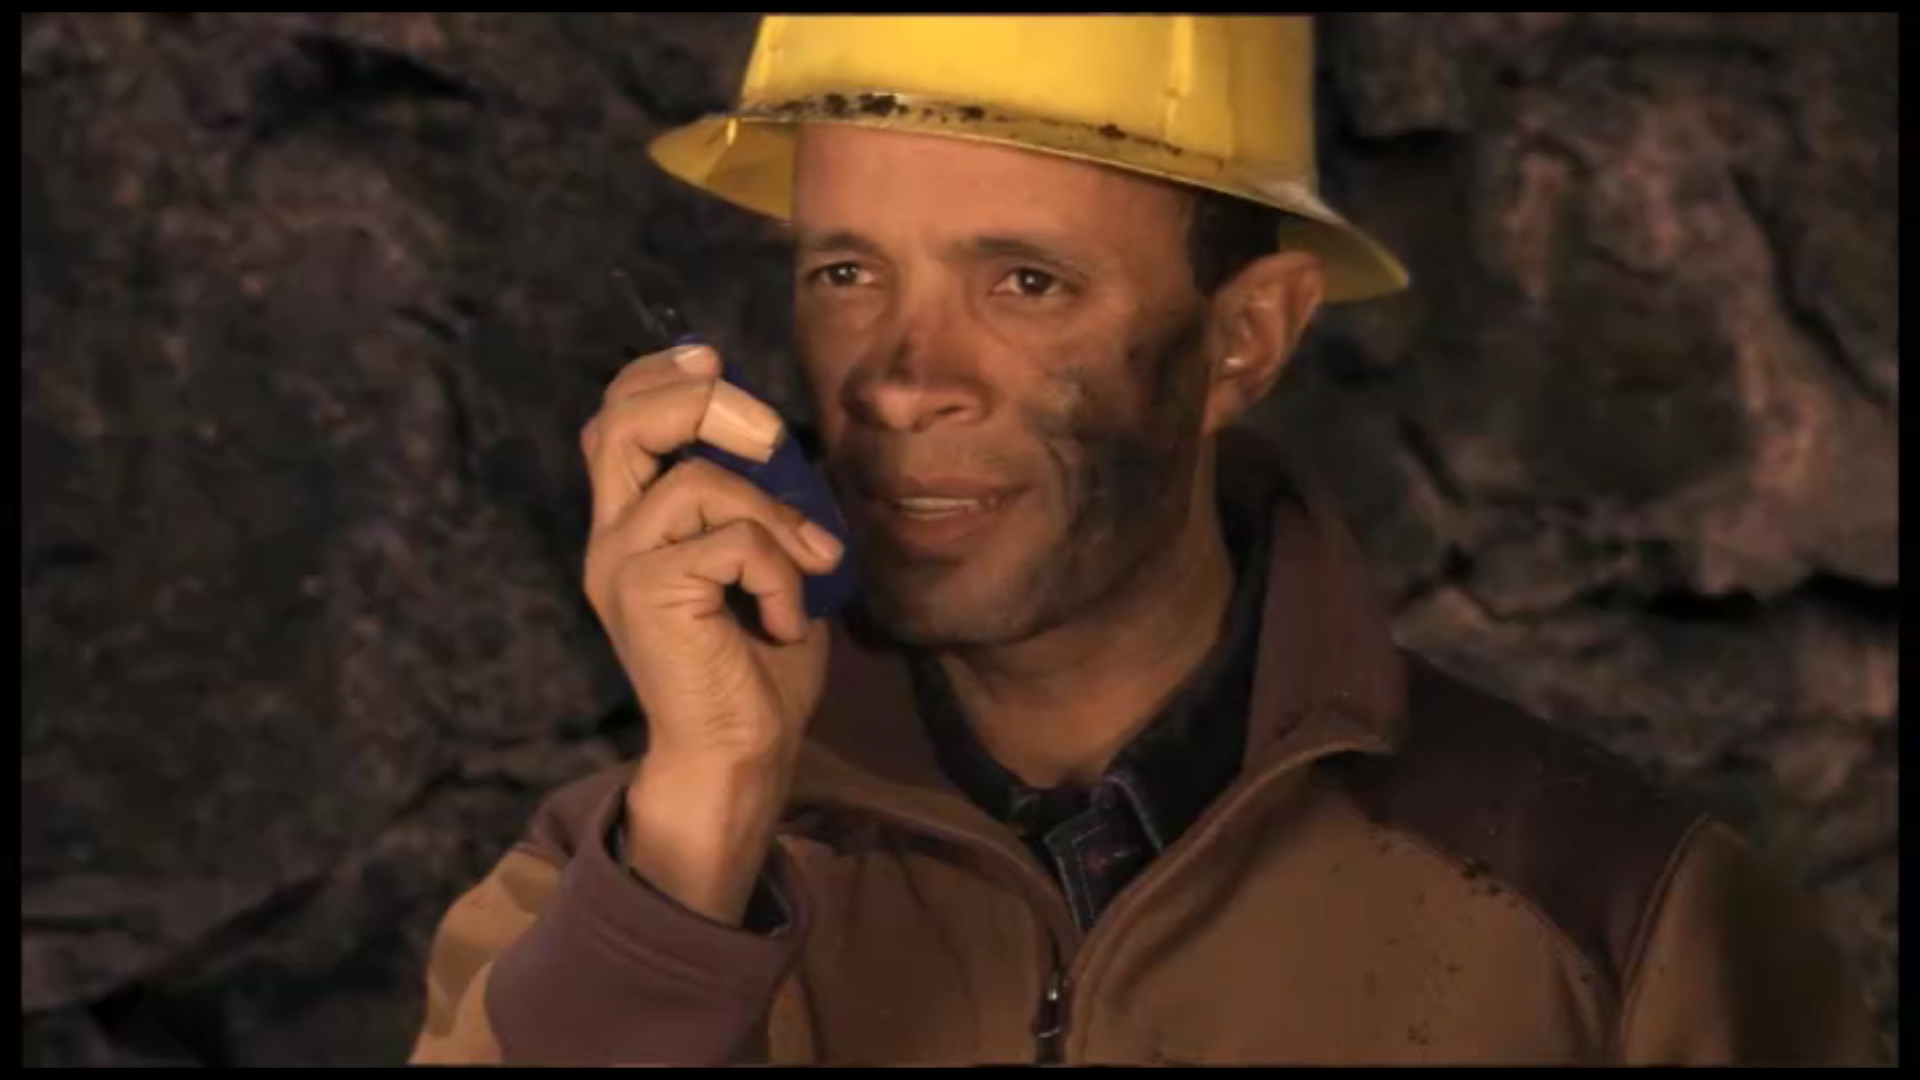 Still of Pedro Sabino in the role of the Chilean Miner's Chief for a TV commercial.